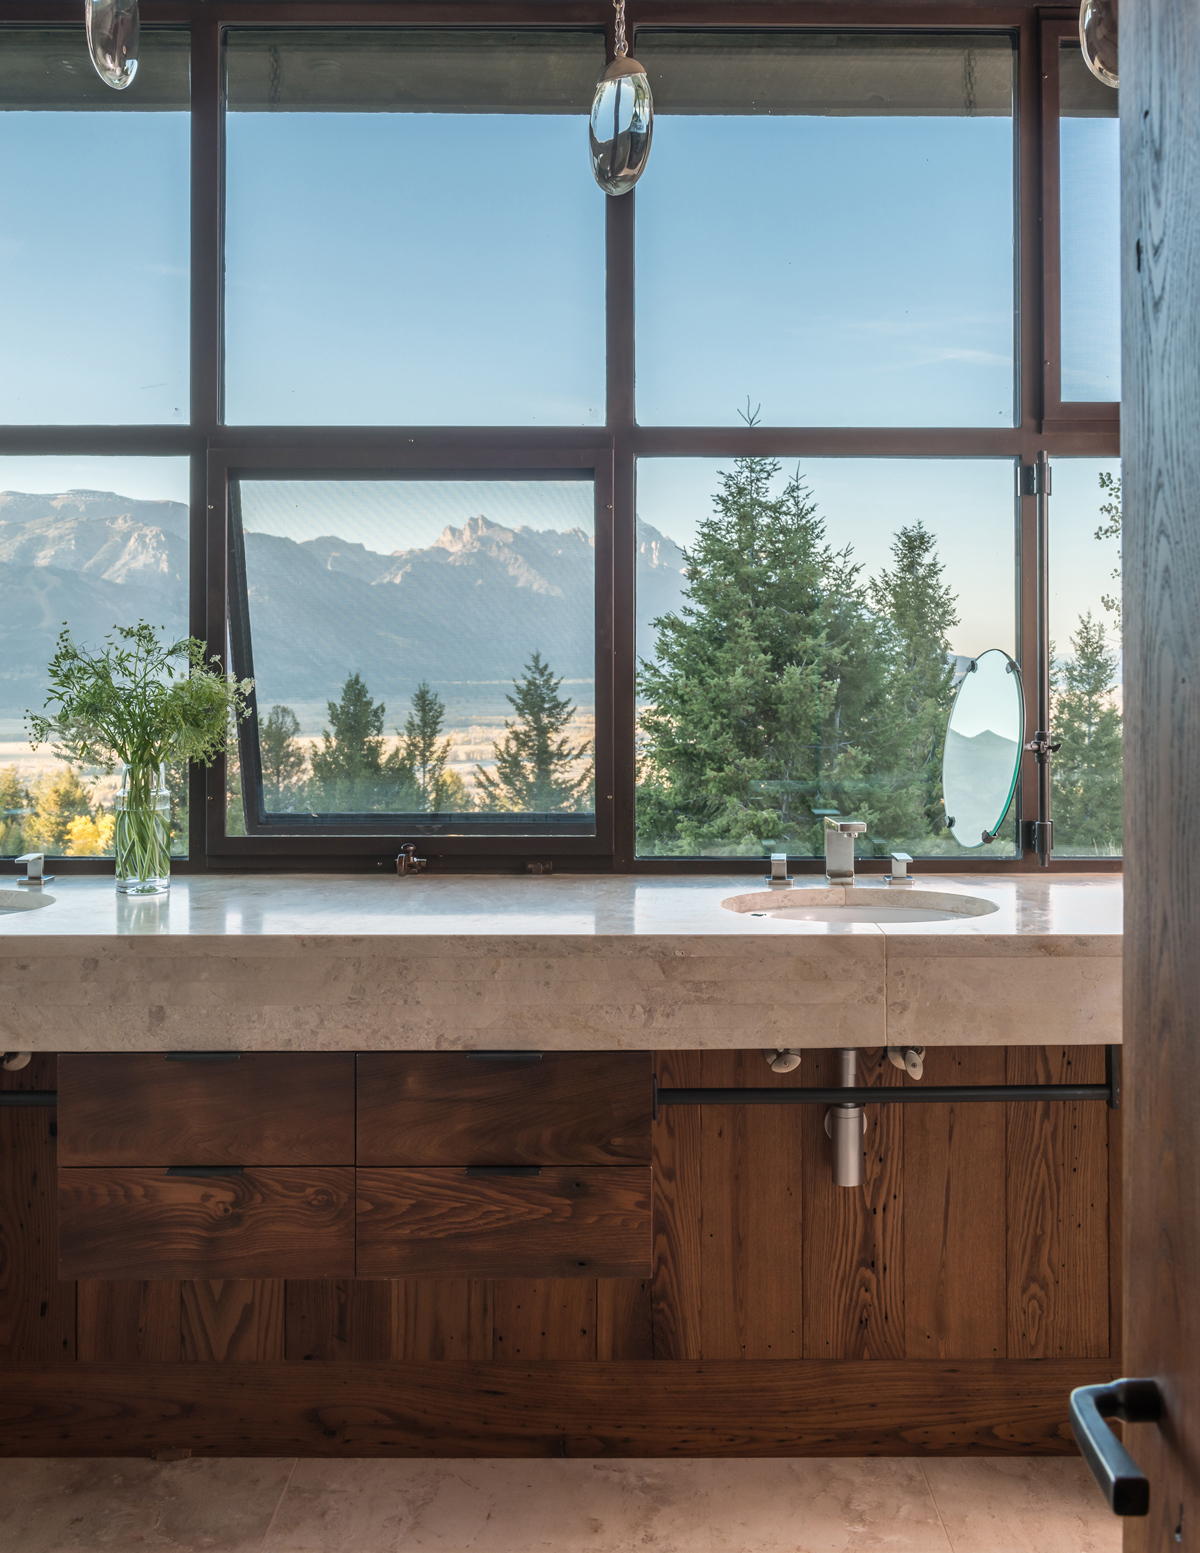 A small custom-made oval stands in for the expected large master bath mirror so homeowners can enjoy dramatic Teton views (photo by Audrey Hall).